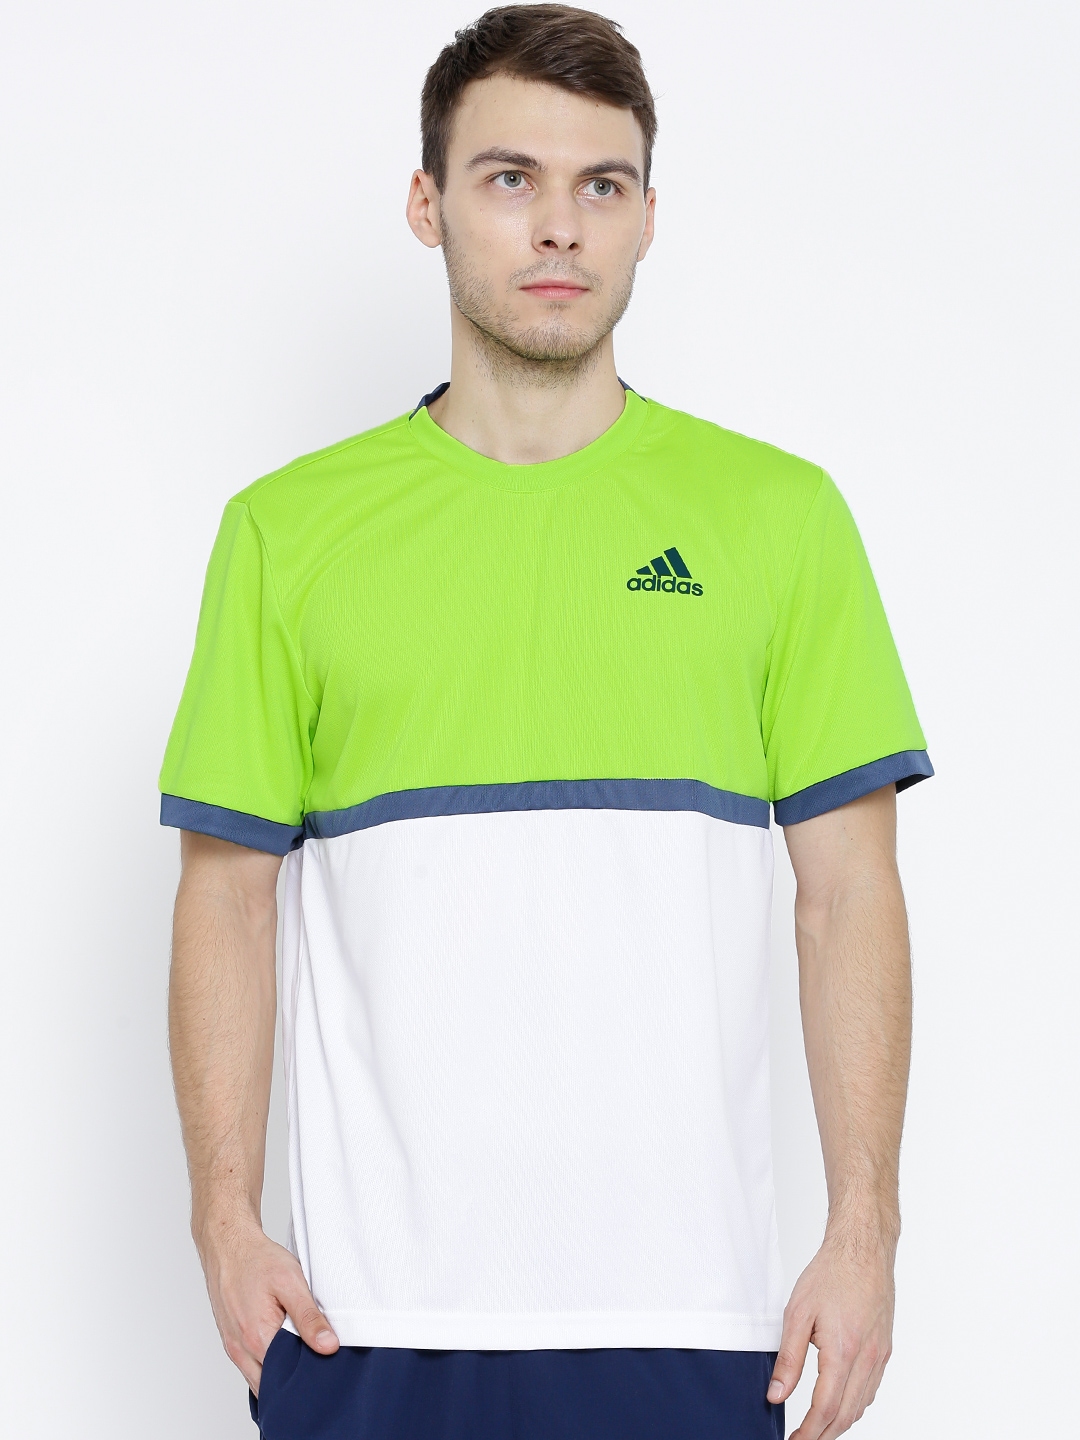 white and green adidas t shirt